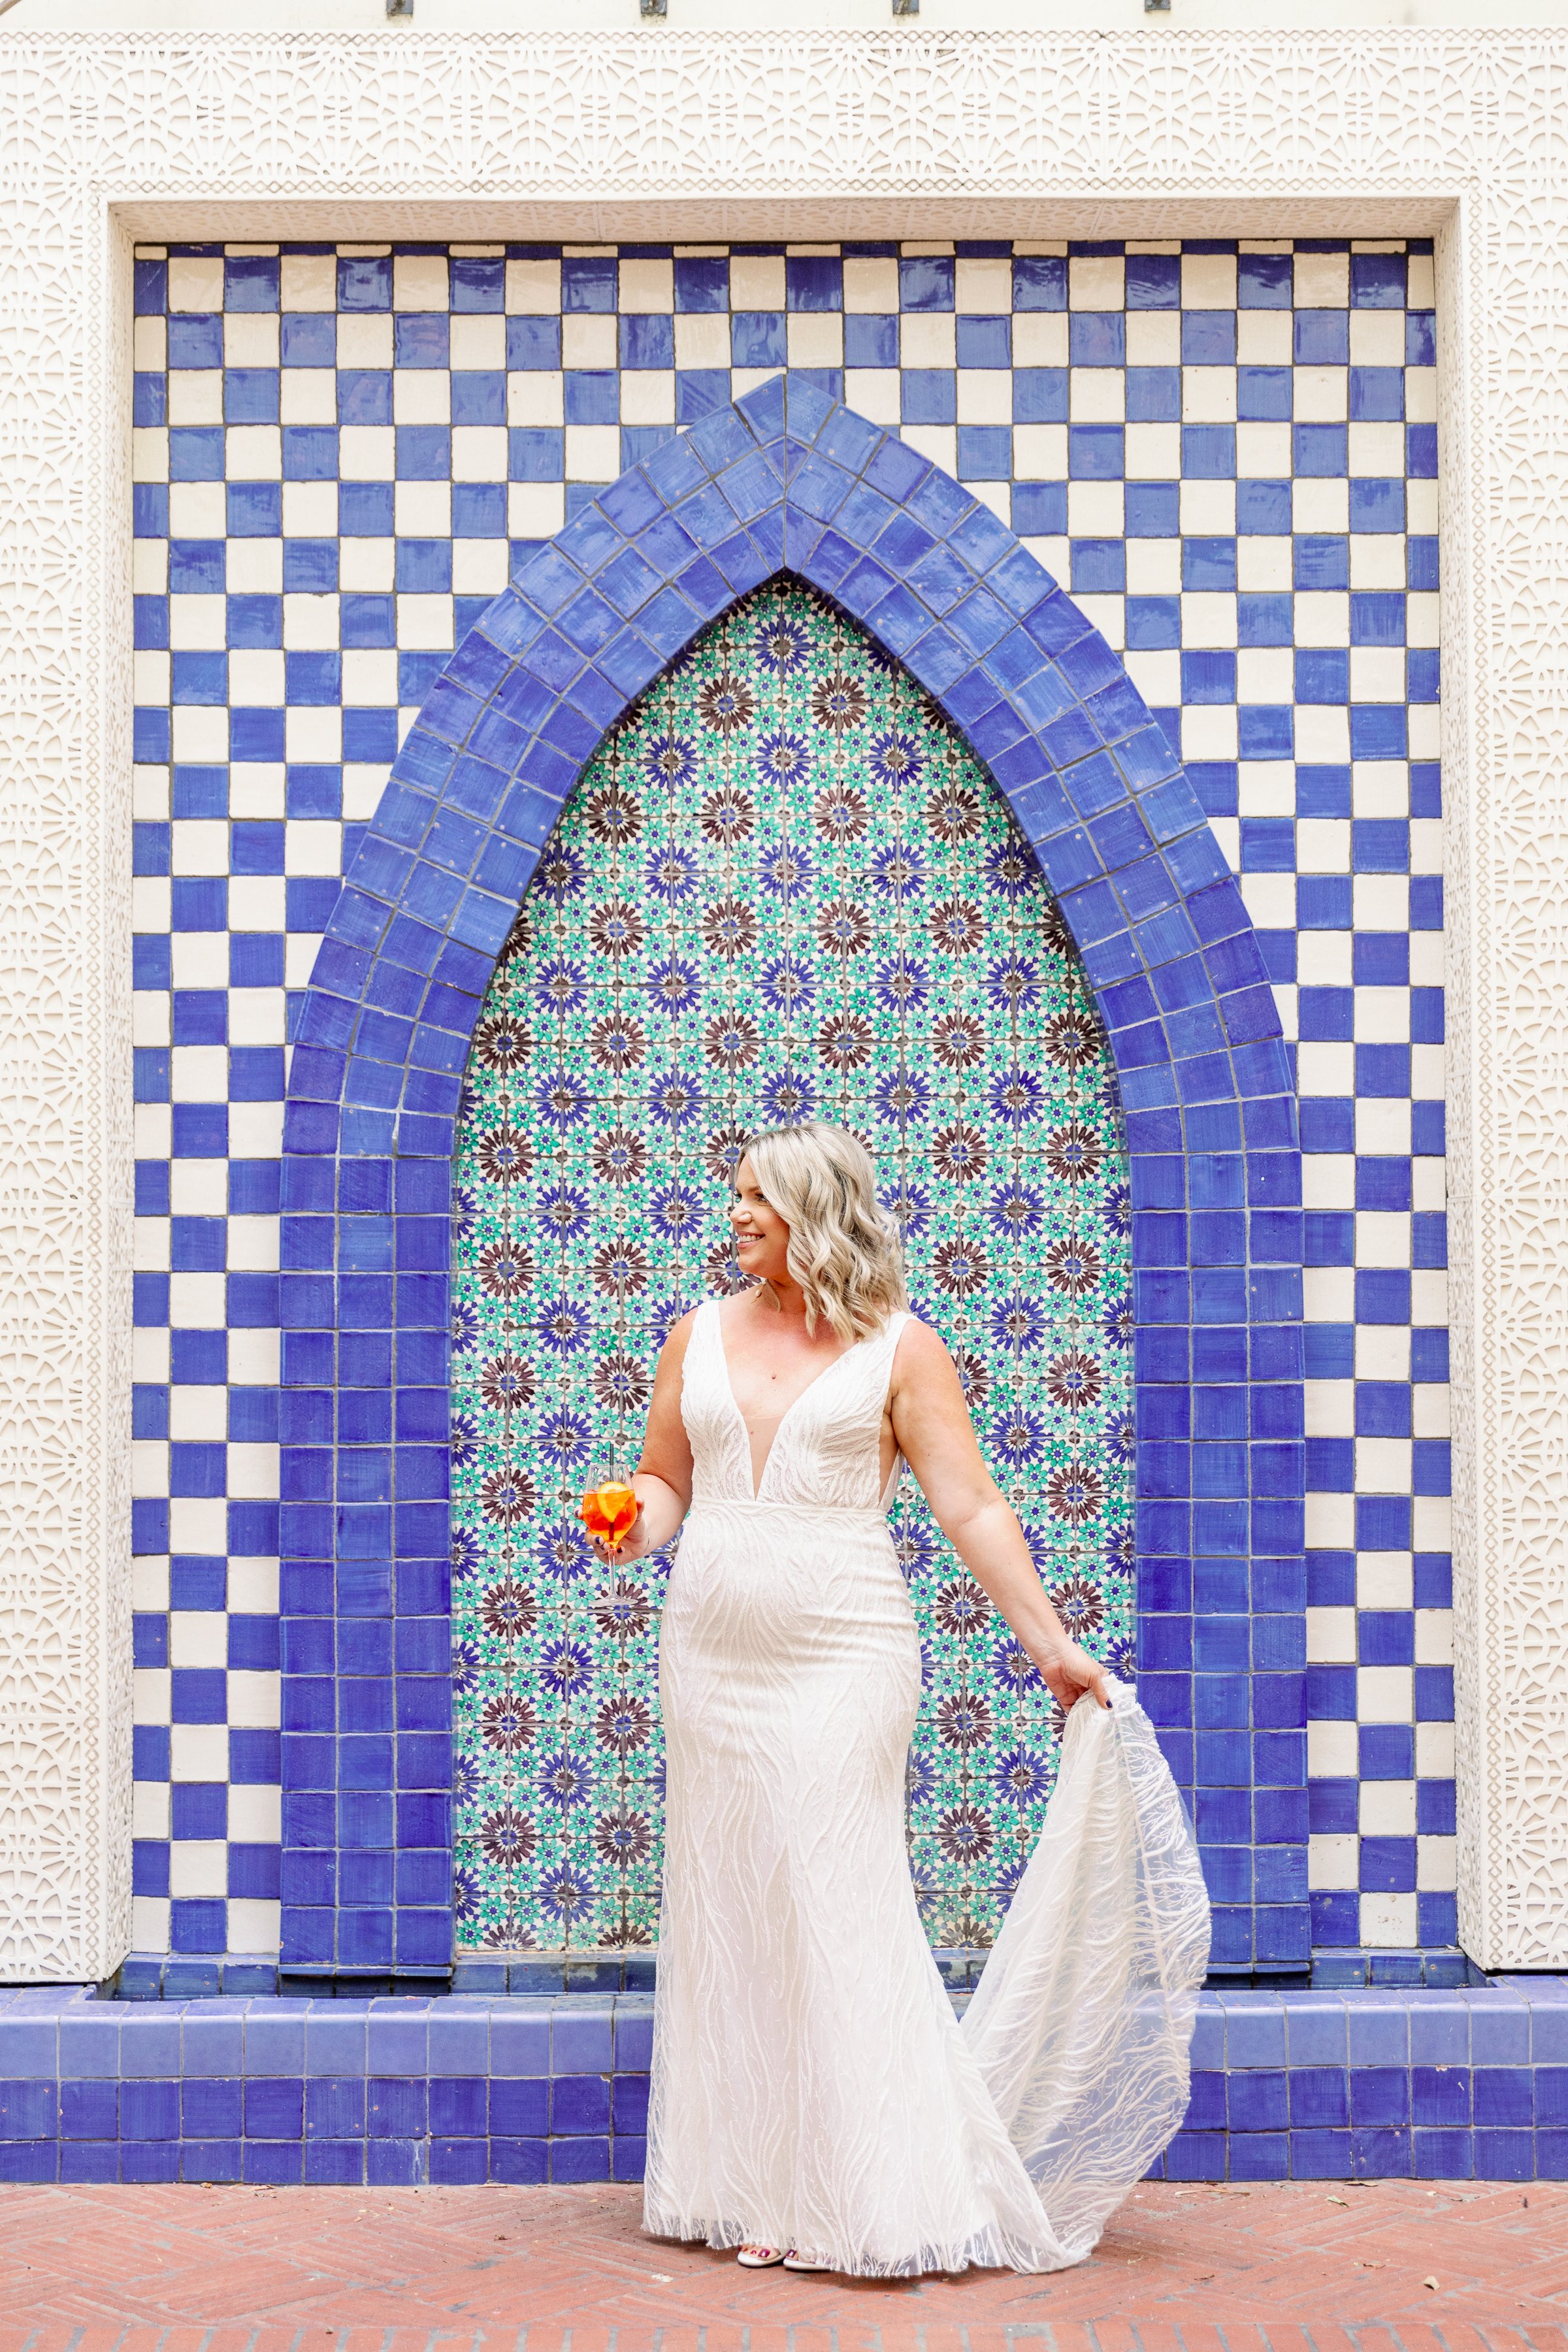 www.santabarbarawedding.com | Ashley LaPrade | Kimpton Canary Hotel | Luck Eleven | Perry Floral | Krysta Biancone | Rose Jones | Made with Love Bridal | Bride in Front of Tile Wall